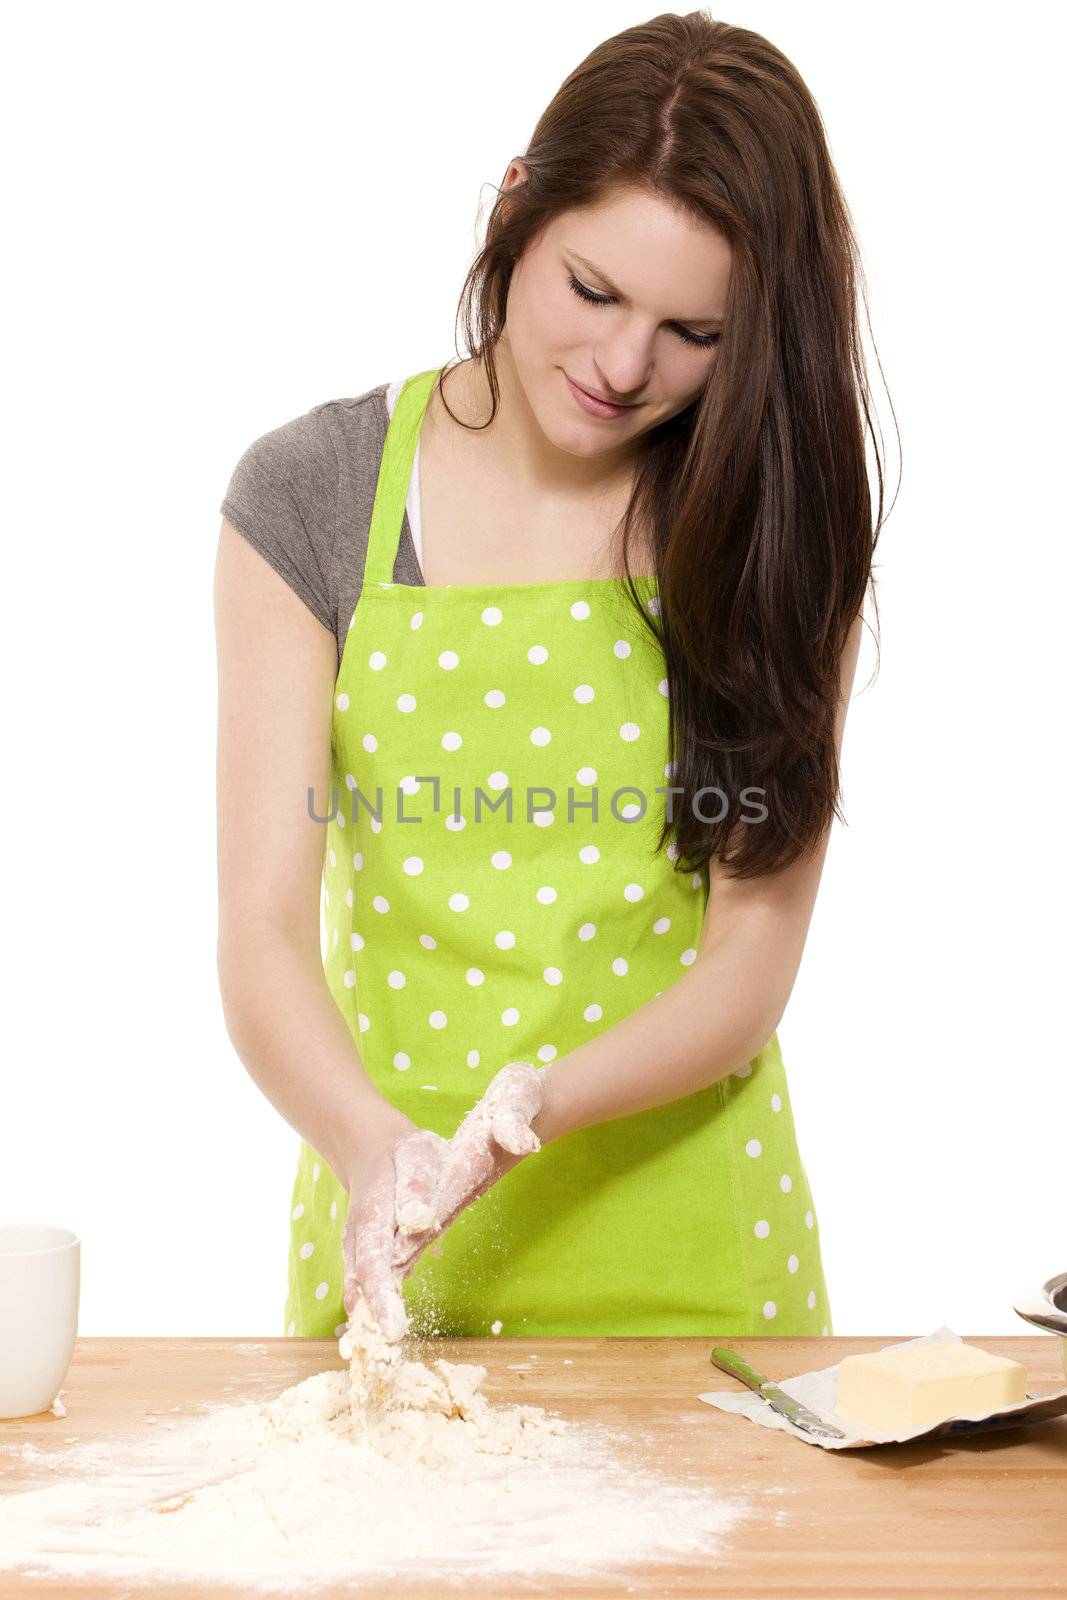 baking woman cleaning hands from dough by RobStark